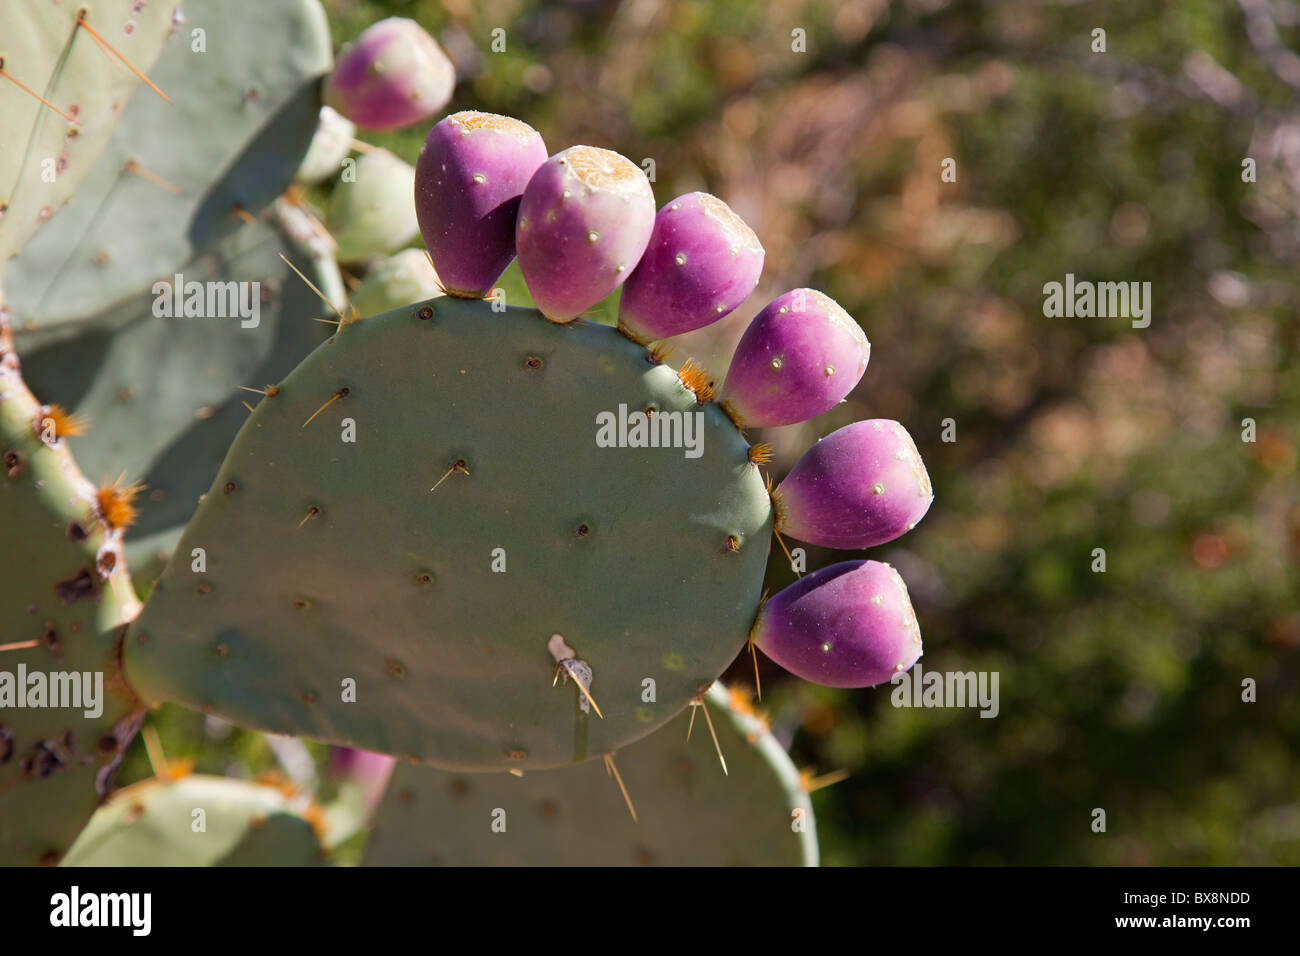 Big Bend National Park, Texas - Fruit on a prickly pear cactus. Stock Photo